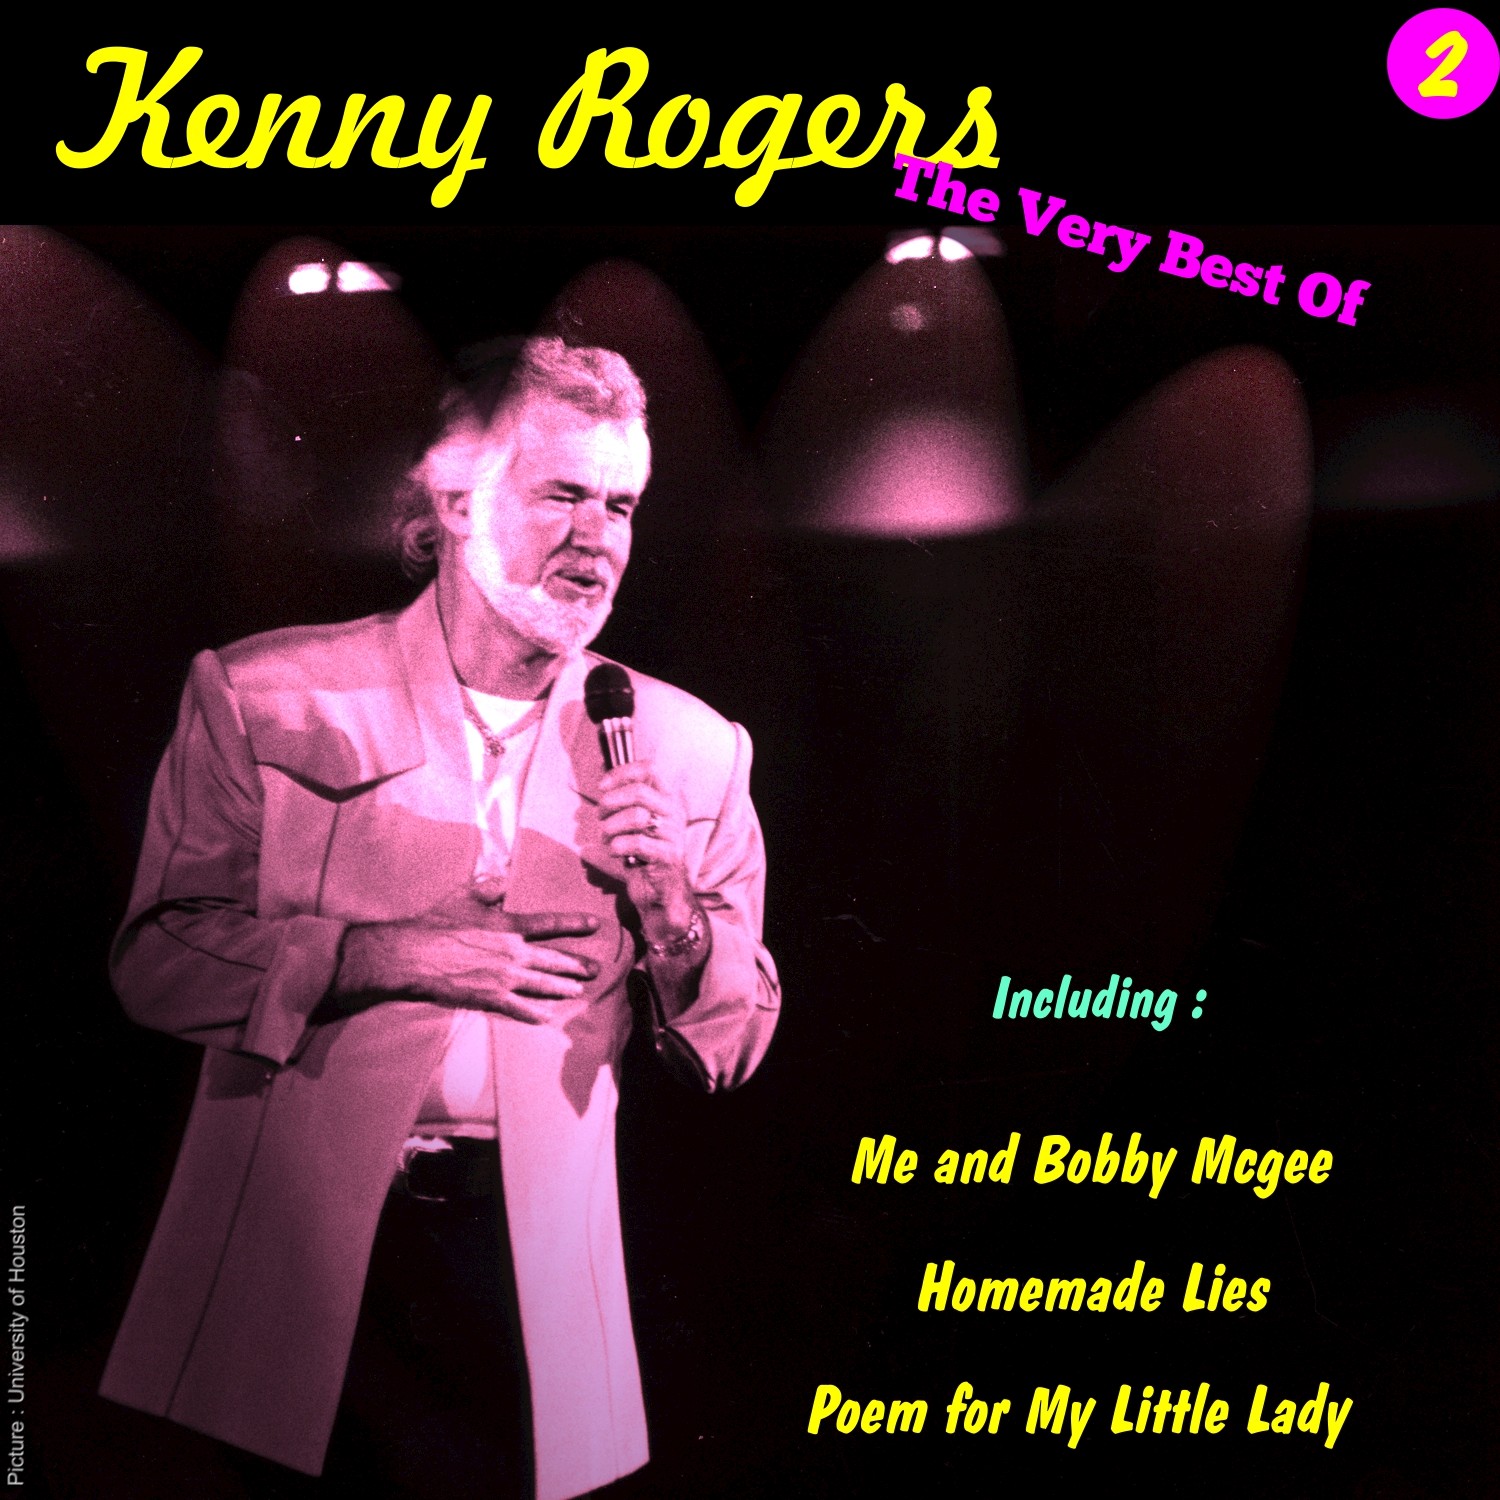 Kenny Rogers, the Very Best of,  Vol.2